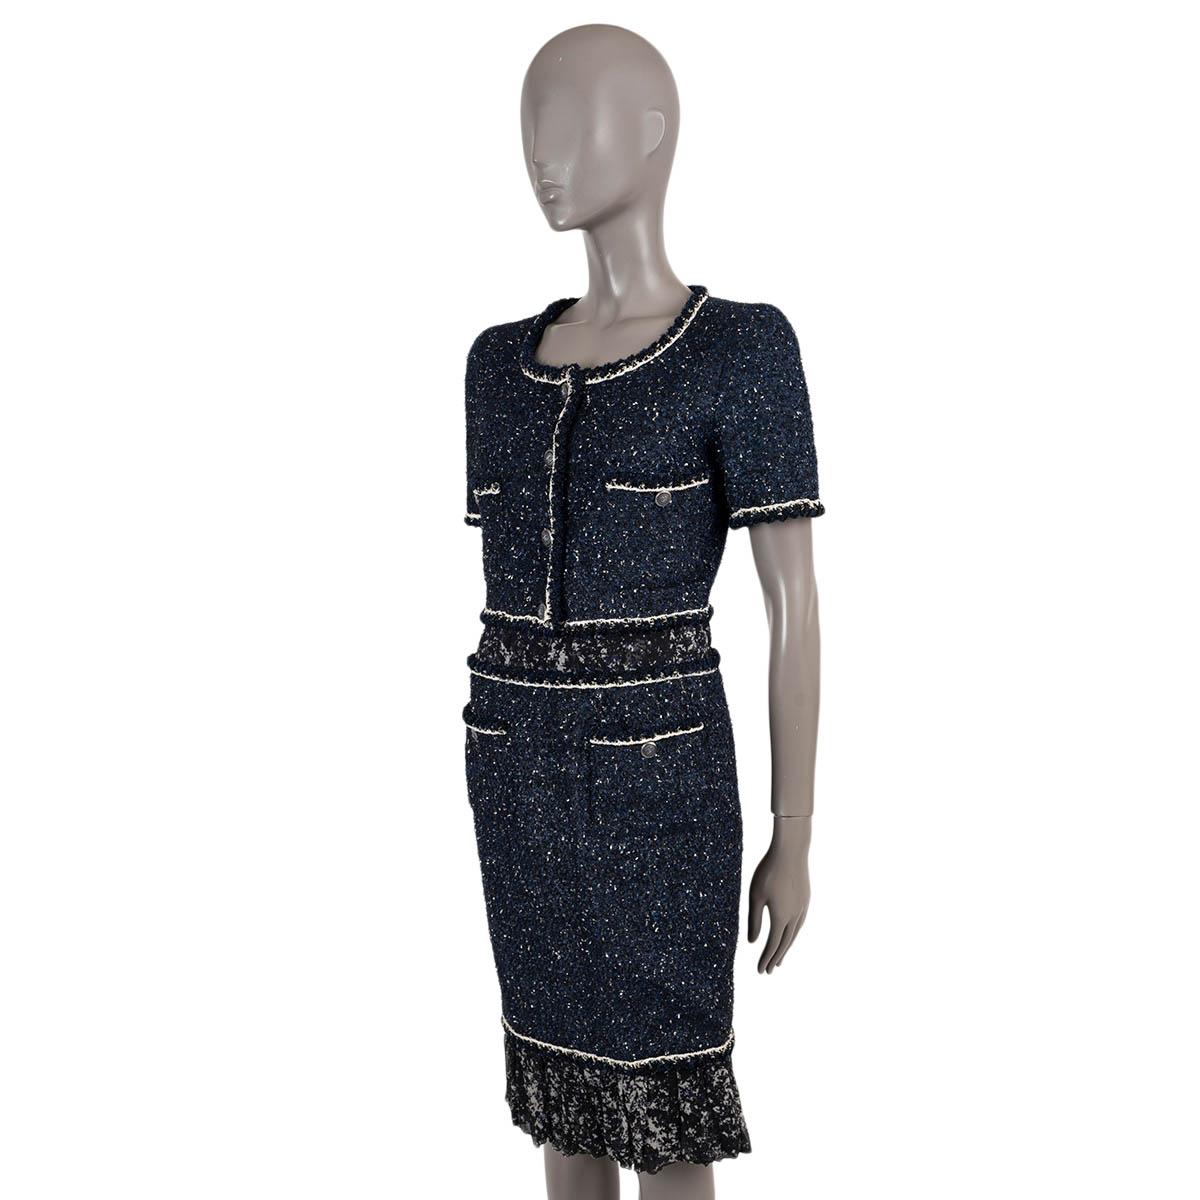 100% authentic Chanel panelled tweed dress in navy blue and black acrylic (43%), nylon (23%), polyester (20%) and viscose (14%). Features printed silk waist insert and flared bottom hem, a scoop neck, short sleeves, decorative button front and four